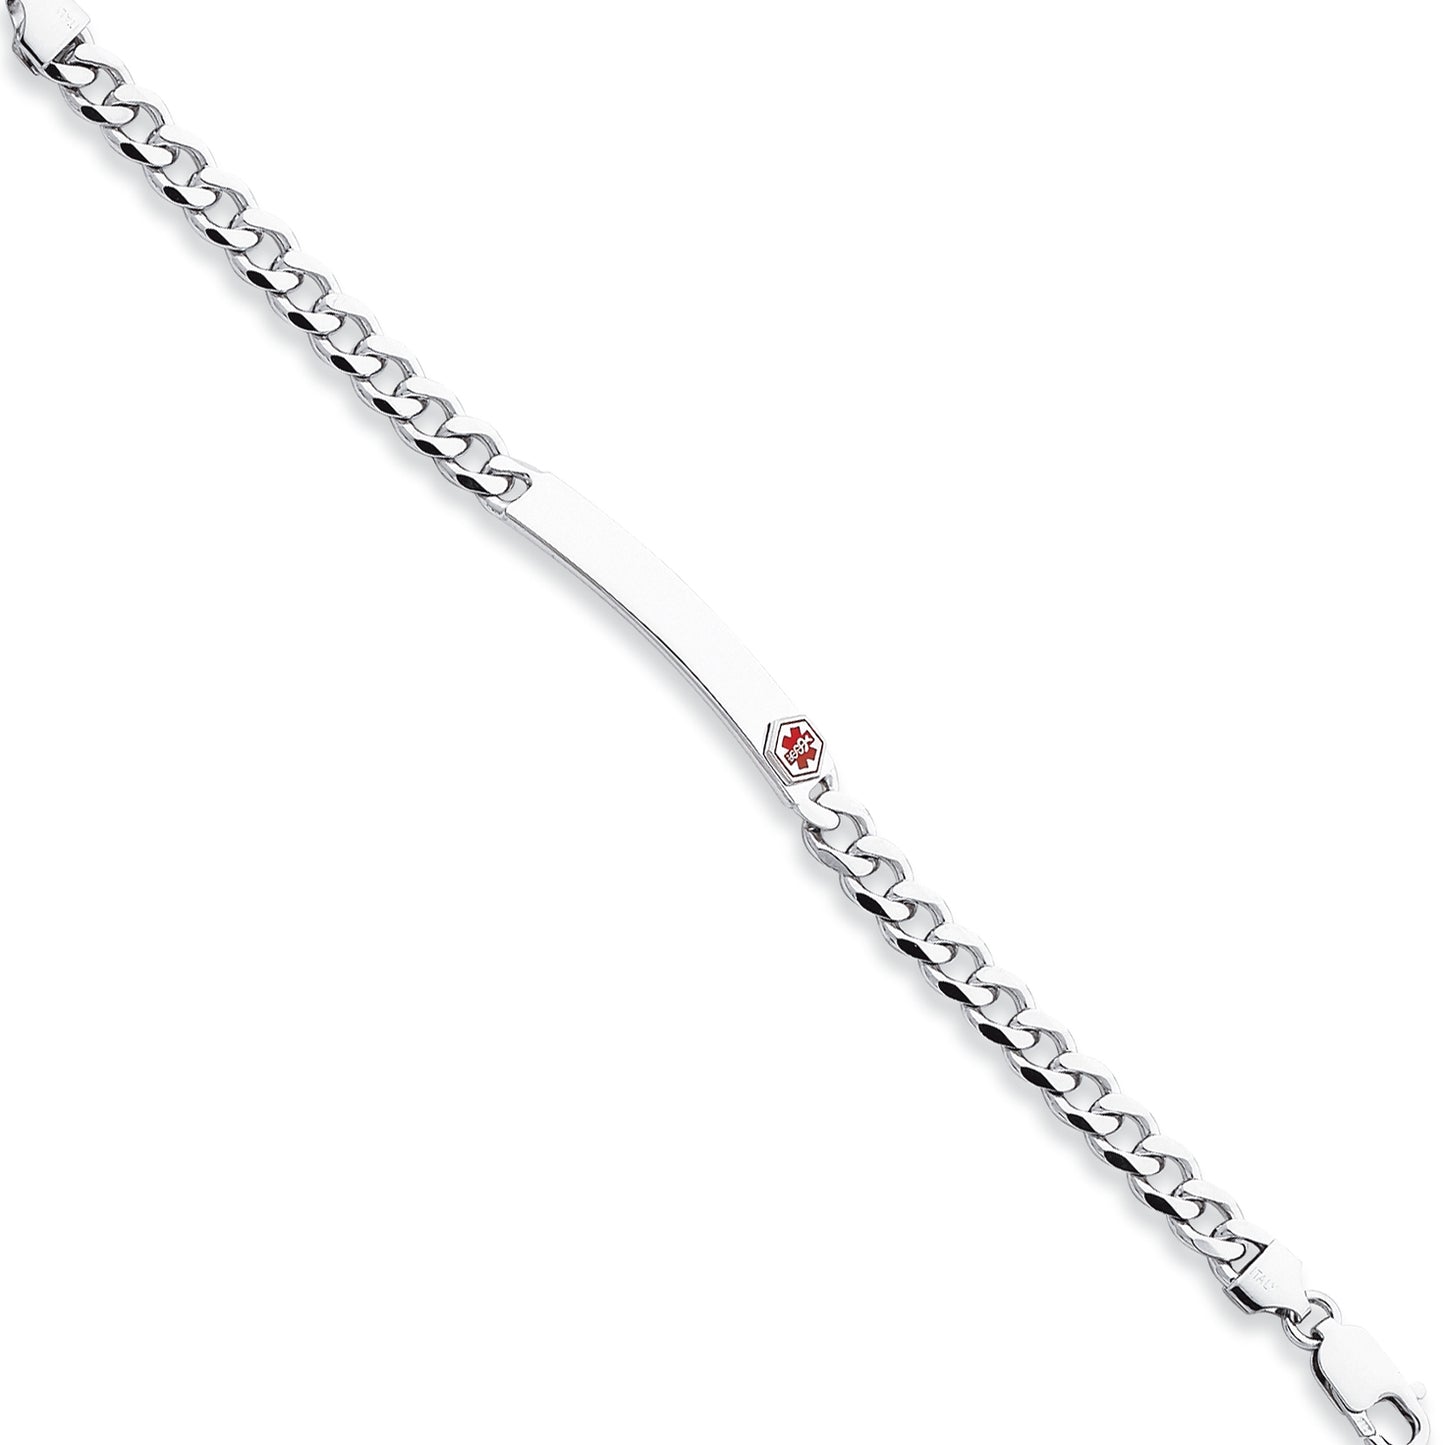 Sterling Silver Enameled Medical ID Curb Link Bracelet 8 Inches